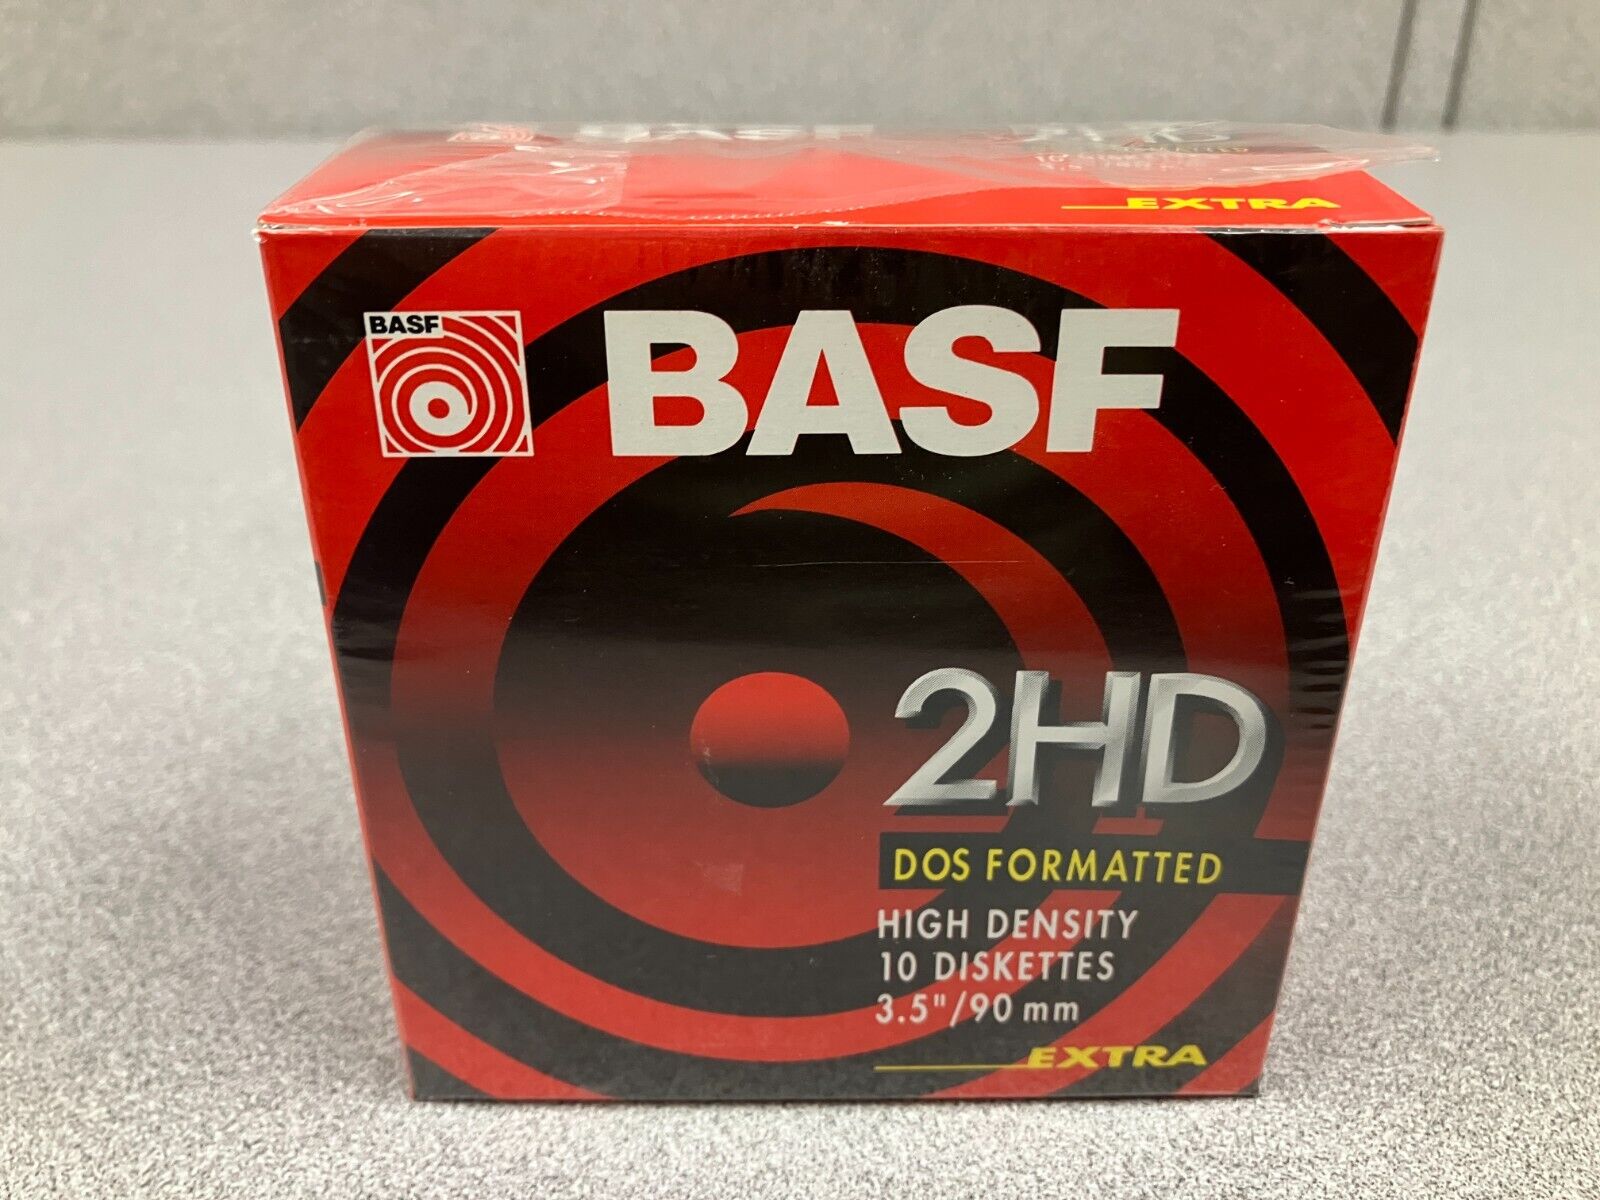 BASF 2HD 10 DOS Formatted Floppy Diskettes Disk 3.5